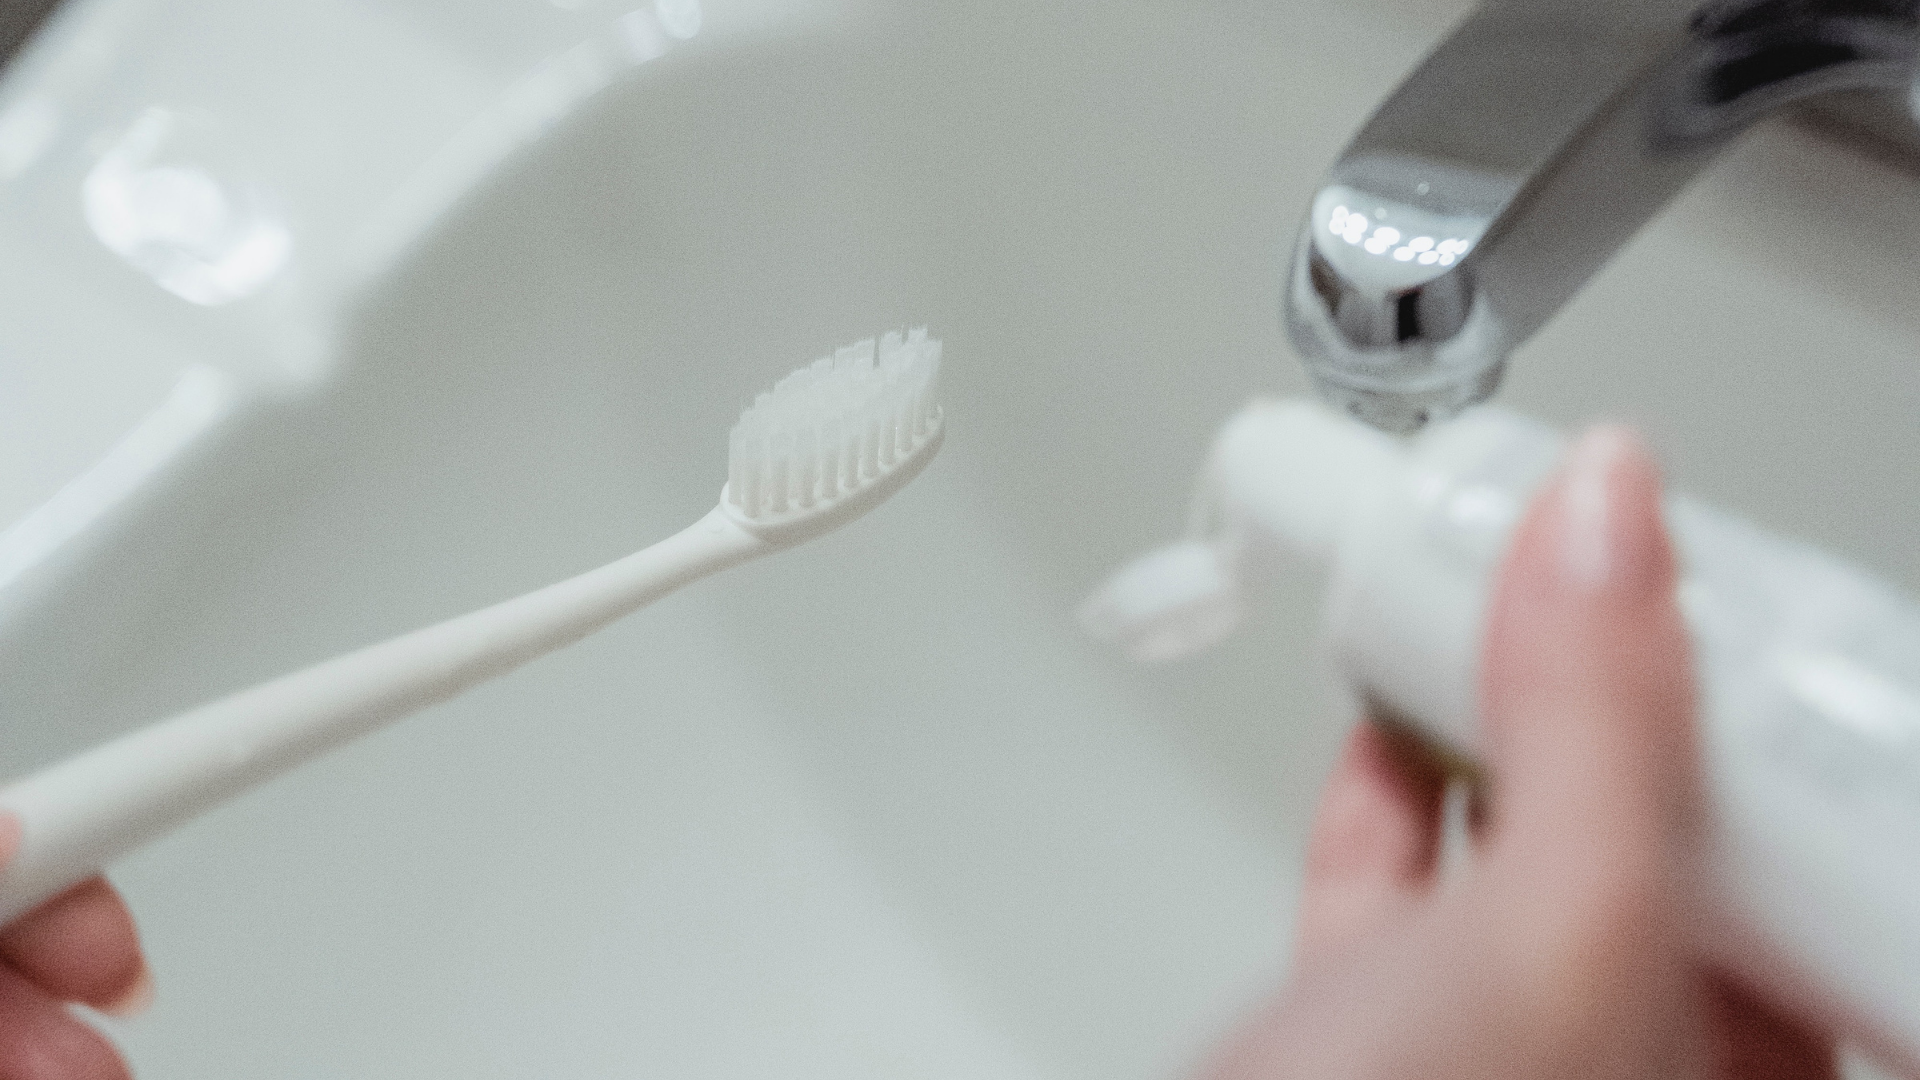 hand holding toothbrush by faucet